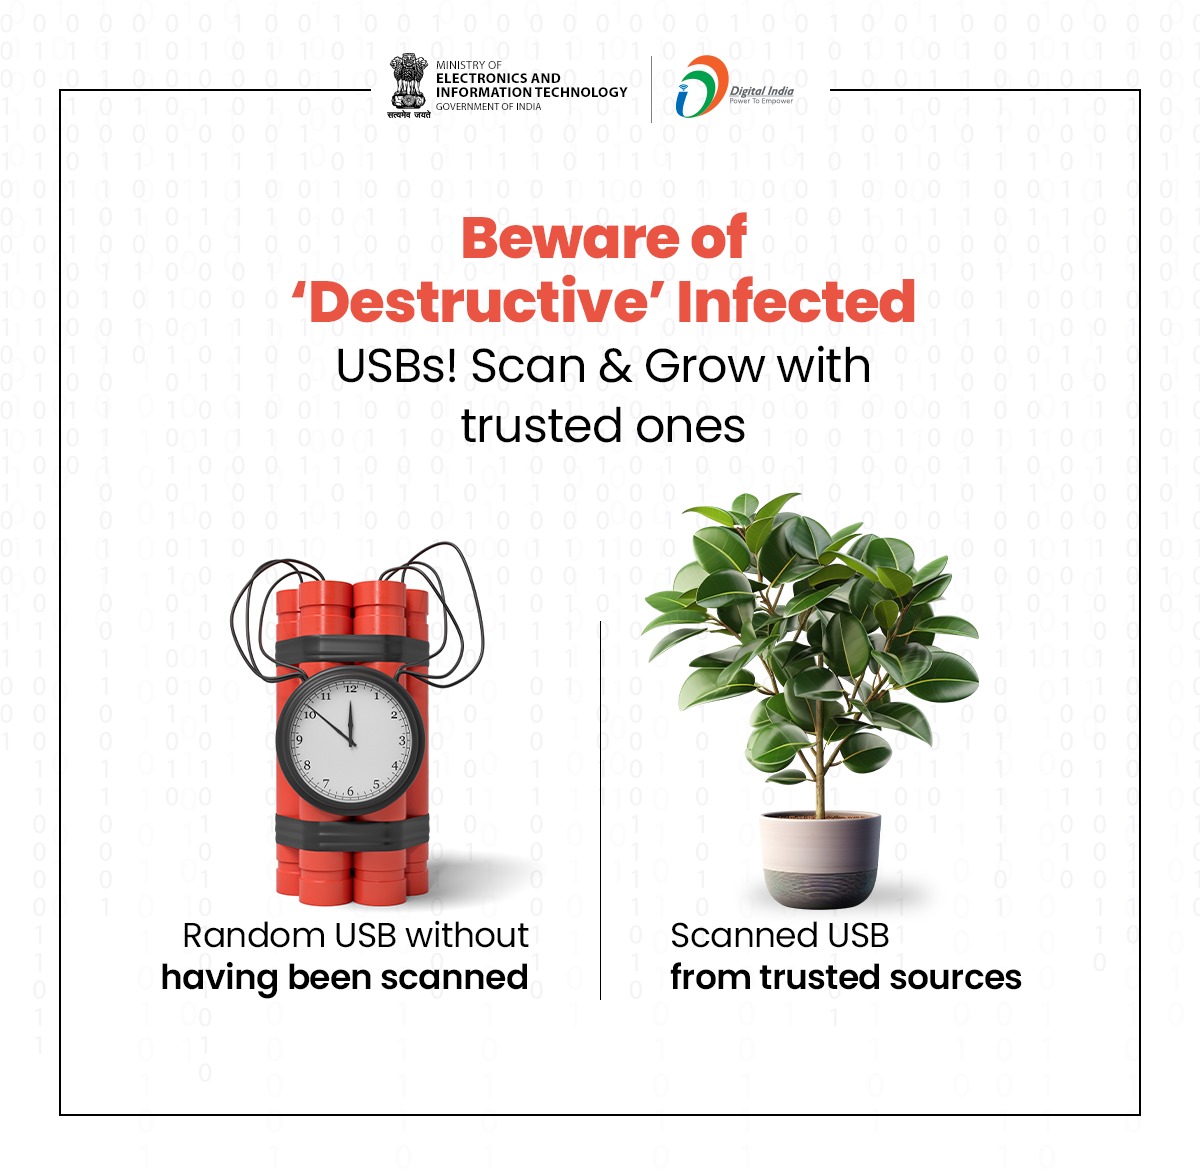 Be cautious with USBs! Avoid using unknown devices to prevent malware infections. Stay safe from cyber threats. 💻🔌#DataSecurity #CyberSafetyTips #DigitalIndia